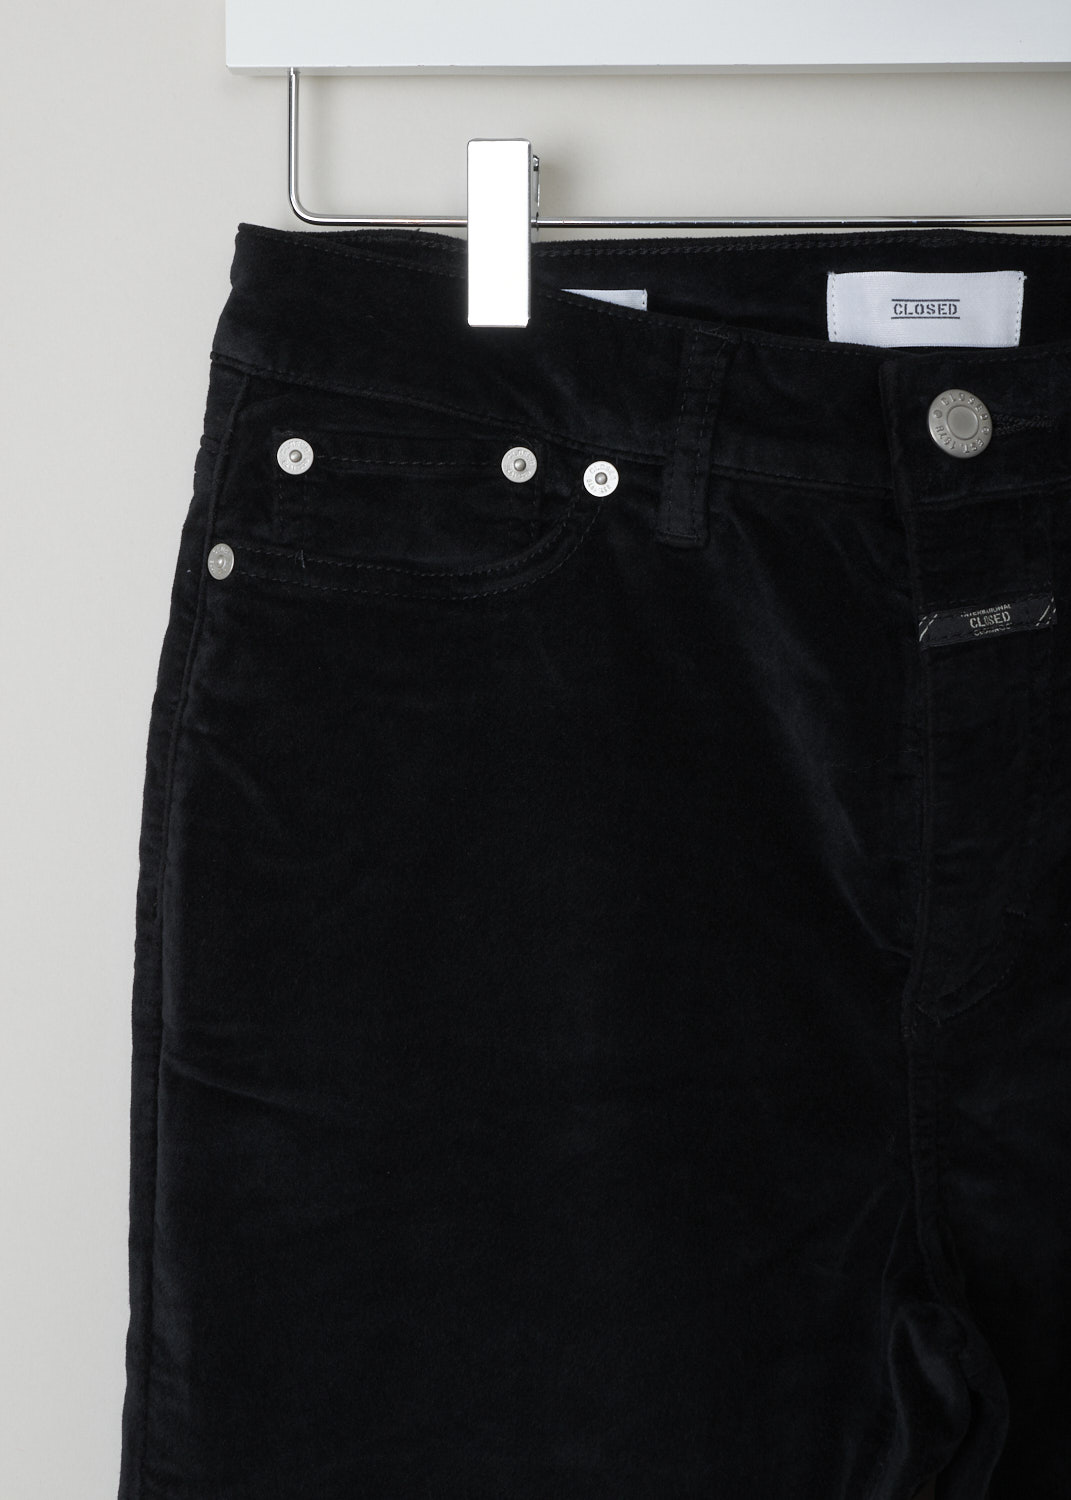 Closed, Black velvet lizzy jeans, lizzy_C91099_38C_30_100, black, detail, Black velvet pants comes in a 5-pocket model, with a high-waist and tapered fit throughout the legs. The cotton blend used on this model is know for its high elasticity and comfort.